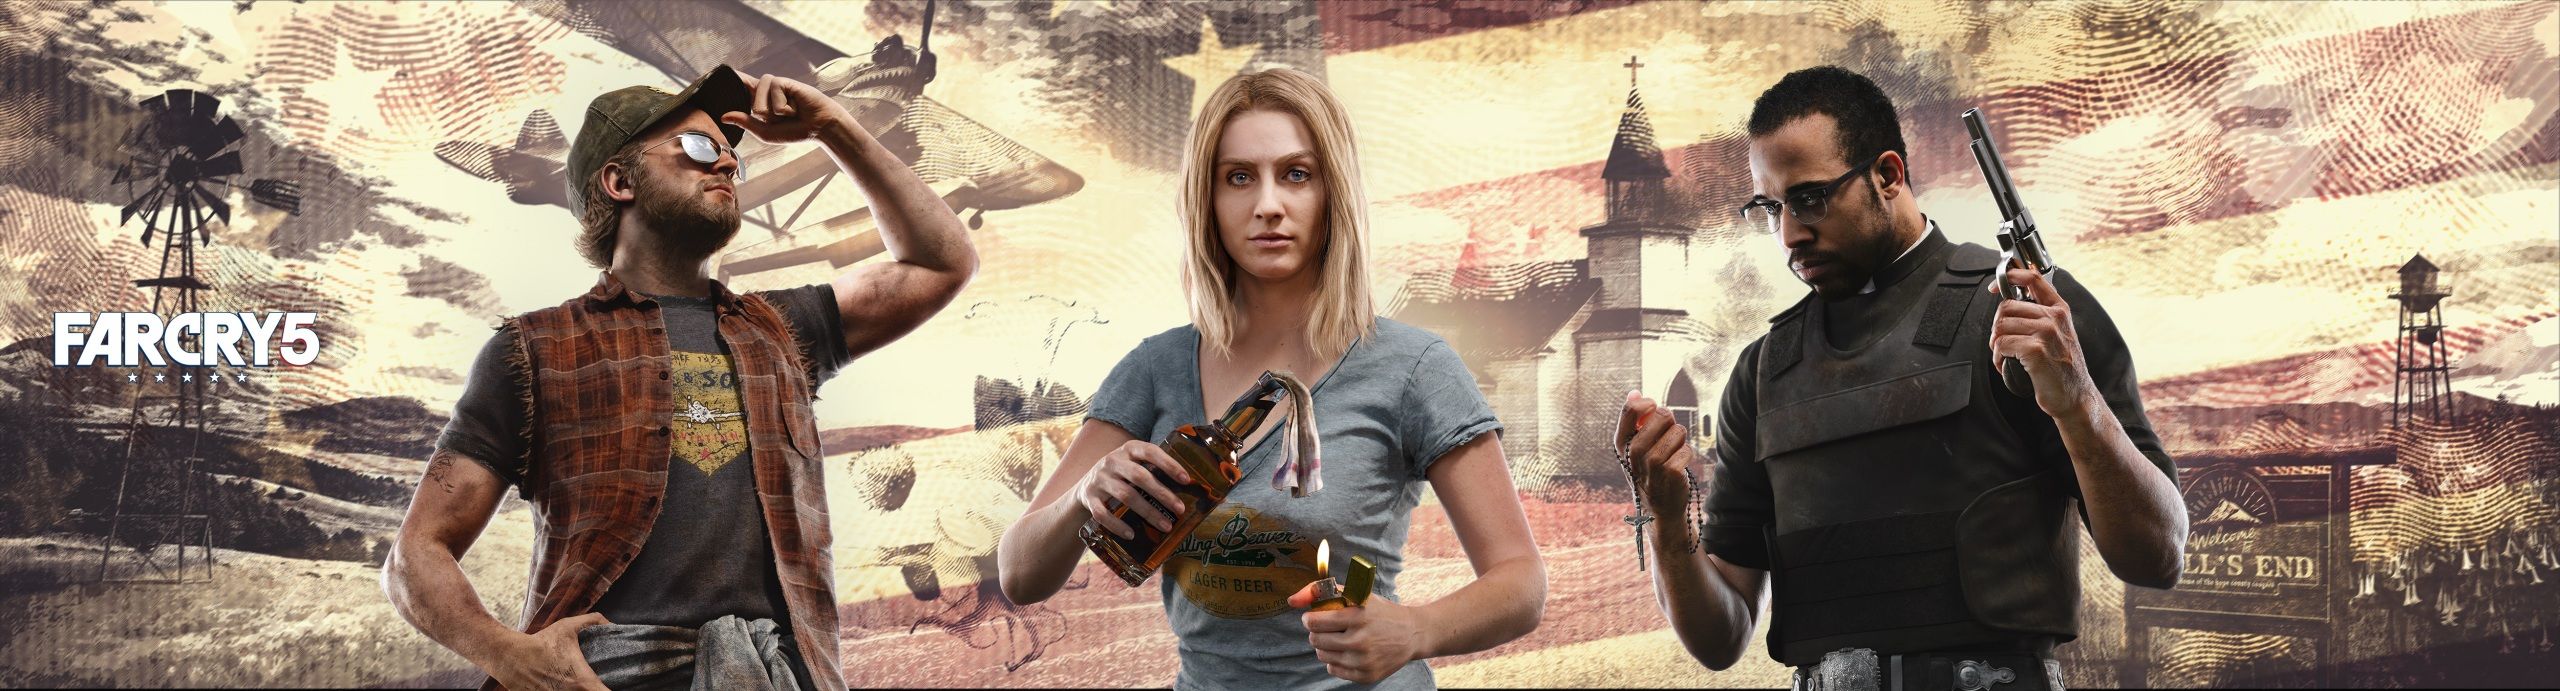 Picture Far Cry 5 Pistols Blonde girl Man female Games 2560x691